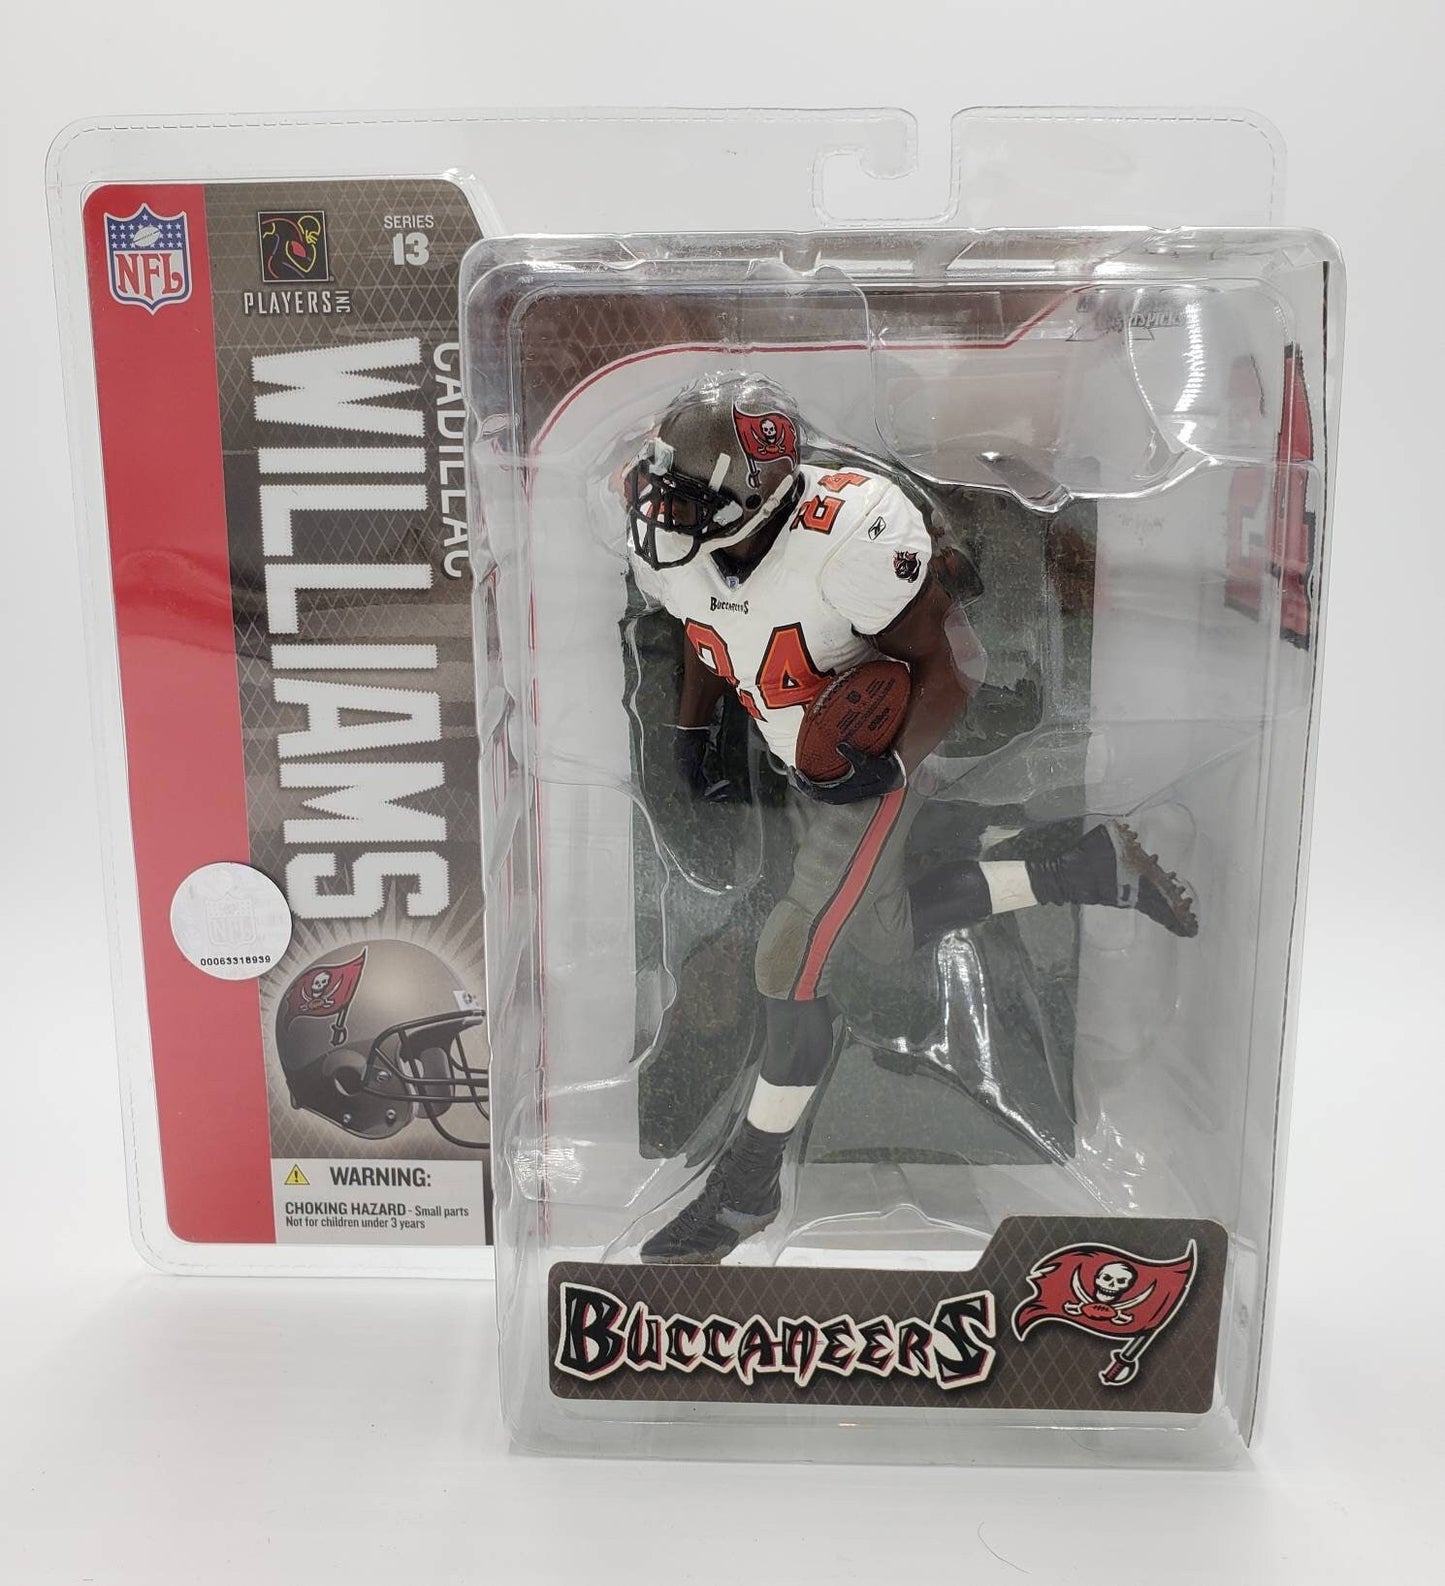 McFarlane Cadillac Williams Tampa Bay Buccaneers Perfect Birthday Gift Collectible NFL Action Figure